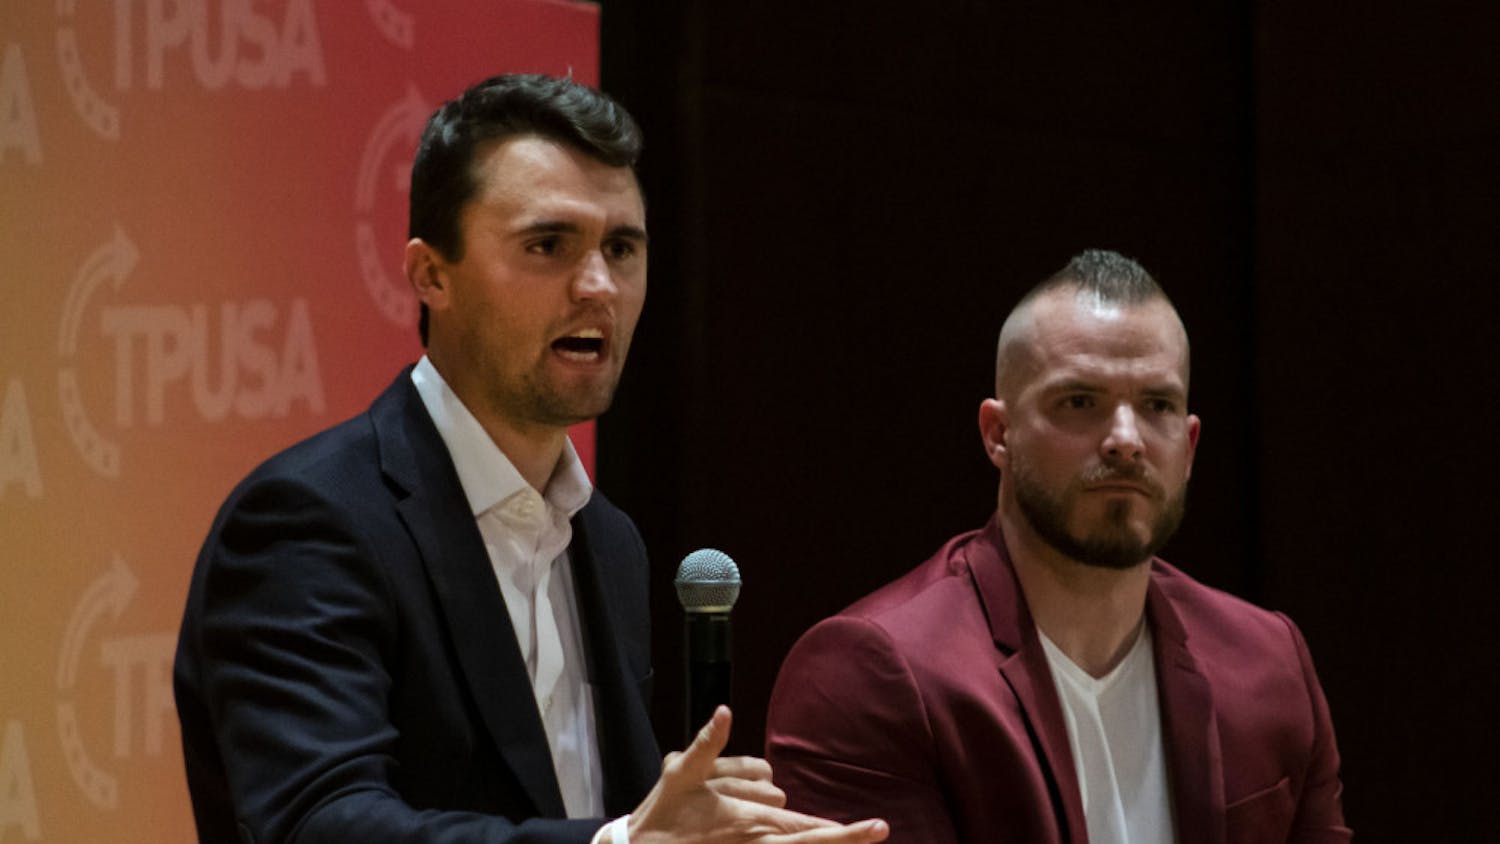 Charlie Kirk, leader of Turning Point USA,  and Graham Allen, political speaker, answer questions from an audience in University Auditorium. Kirk was one of several conservative figures to criticize UF for suspending three student groups for violating university COVID-19 policies.